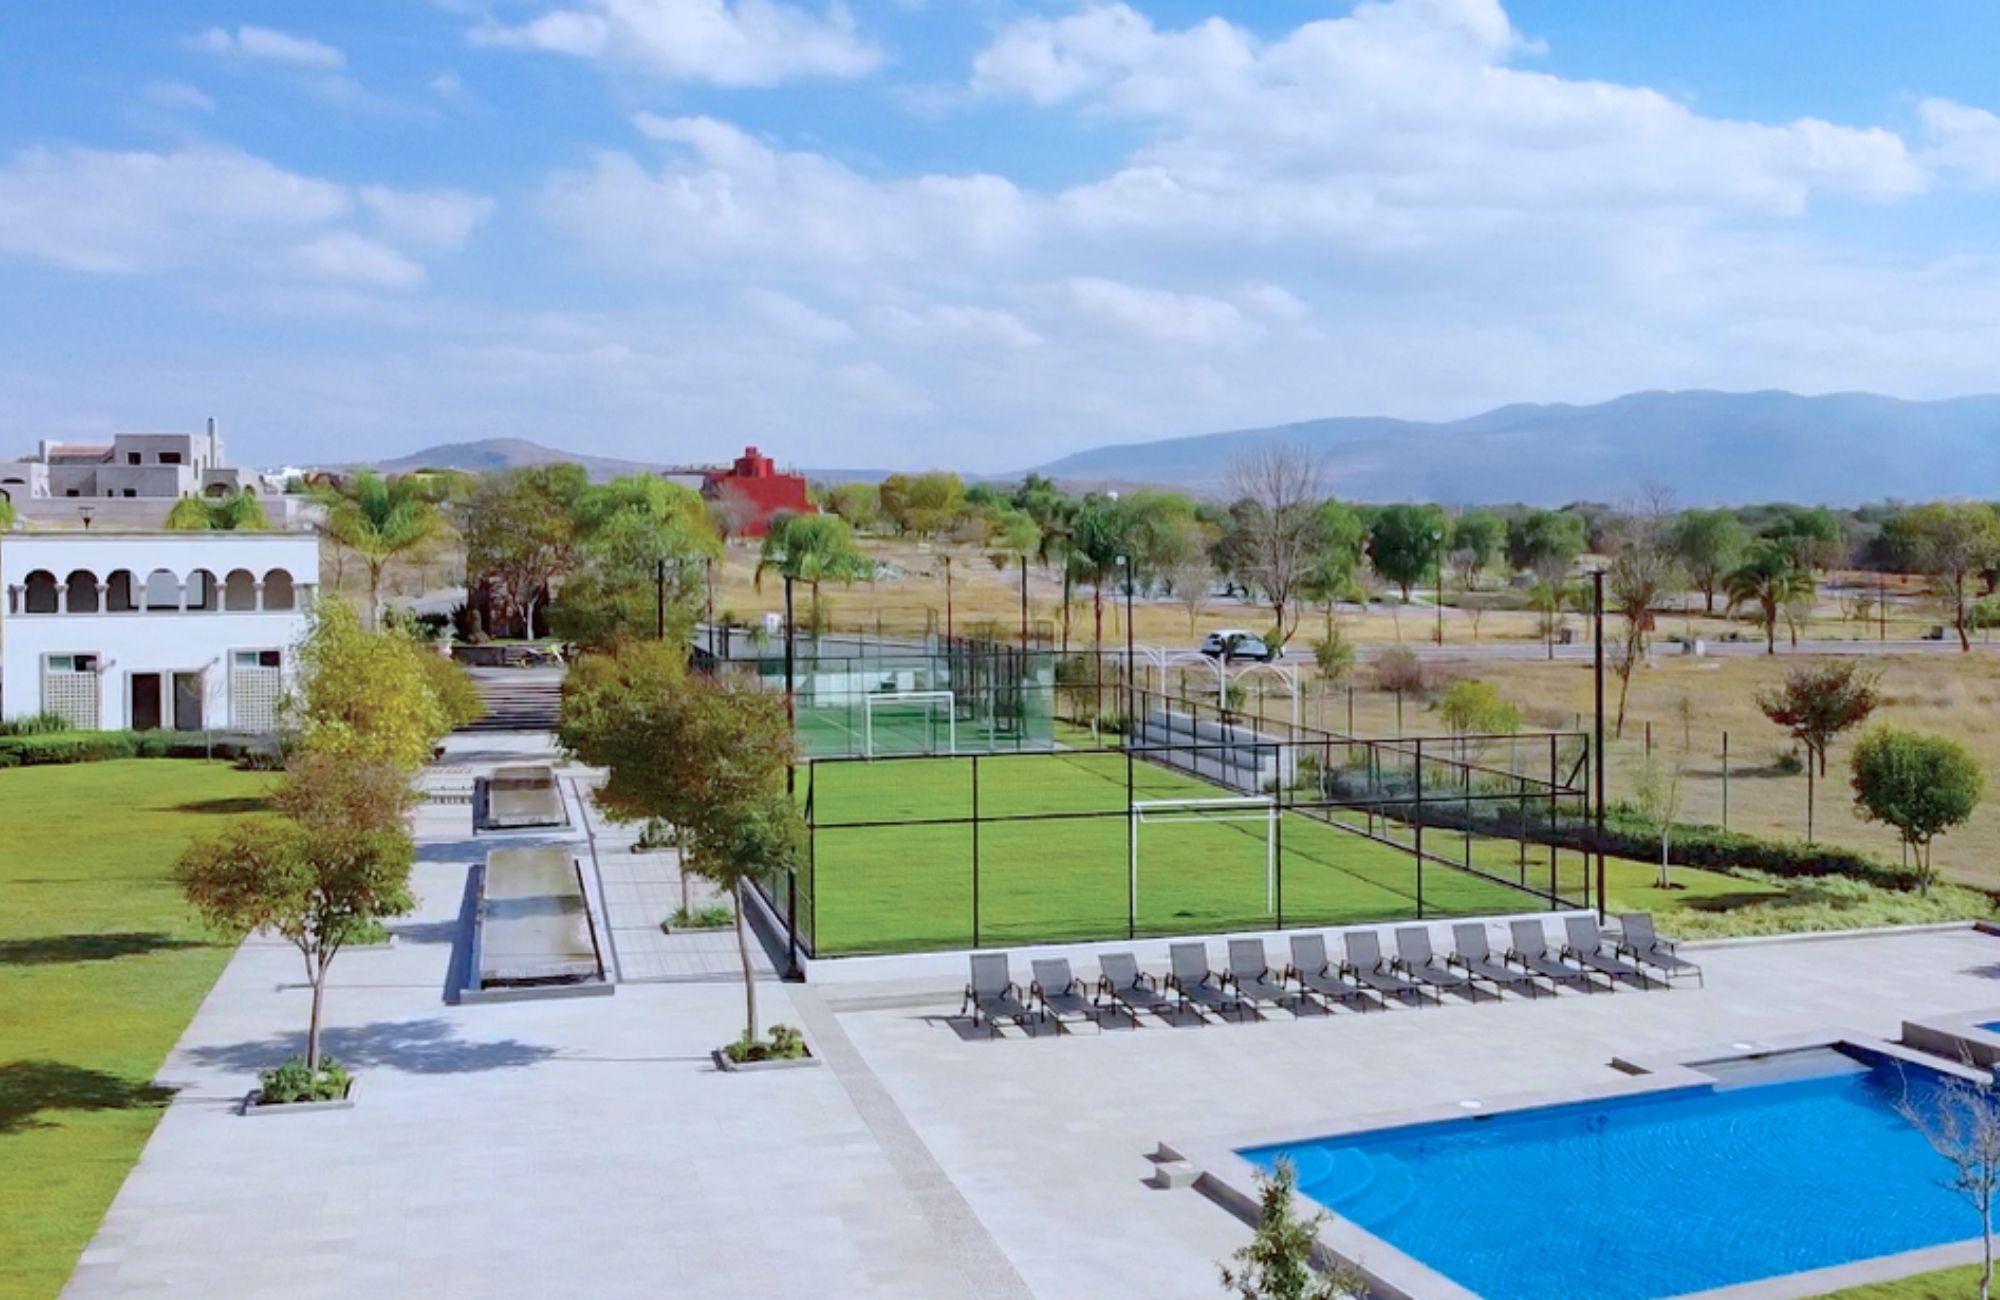 561 sqm lot, clubhouse, pool, gym, jacuzzi, for sale in San Miguel de Allende.